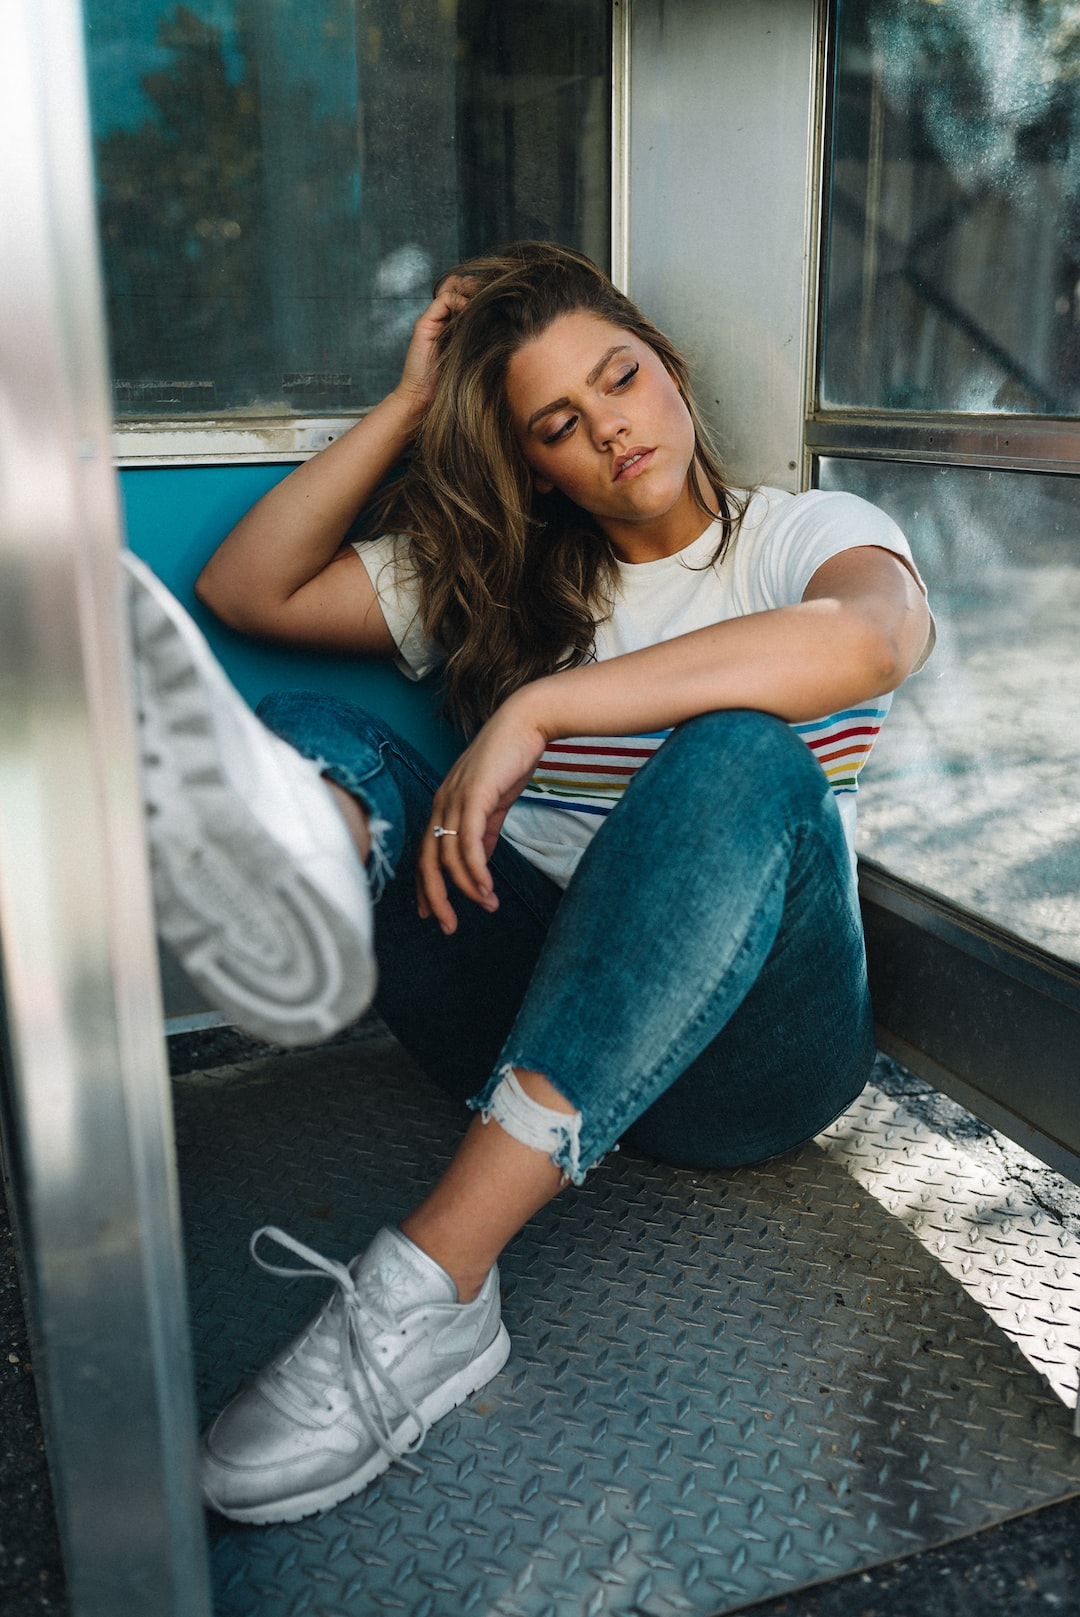 woman in white t-shirt and blue denim jeans sitting on train seat